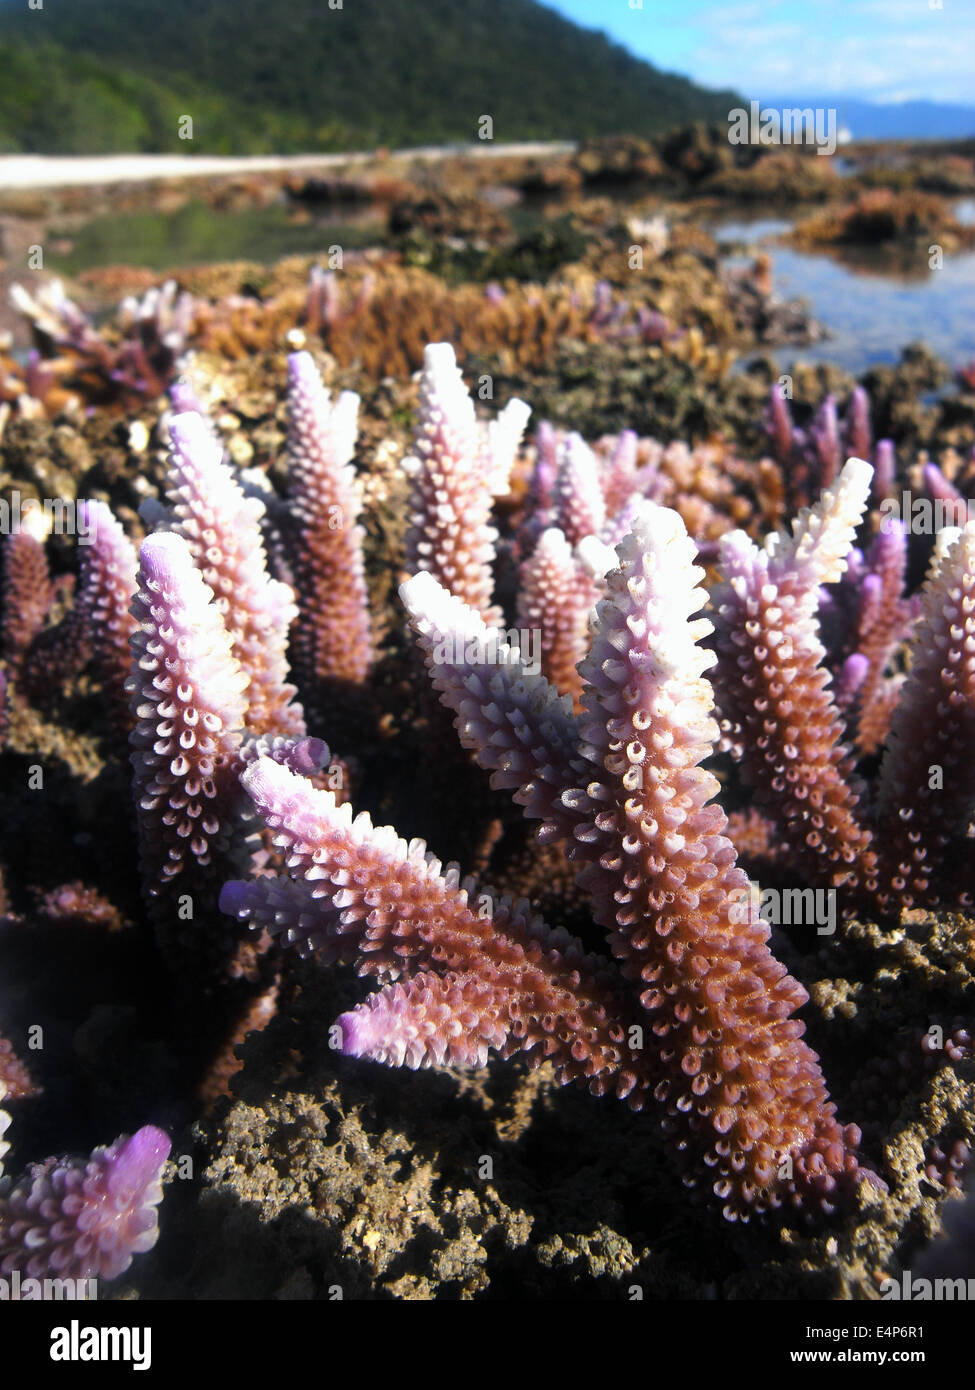 The most exposed tips of purple acroporid coral starting to bleach due to repeated low-tide emersion over several days Stock Photo